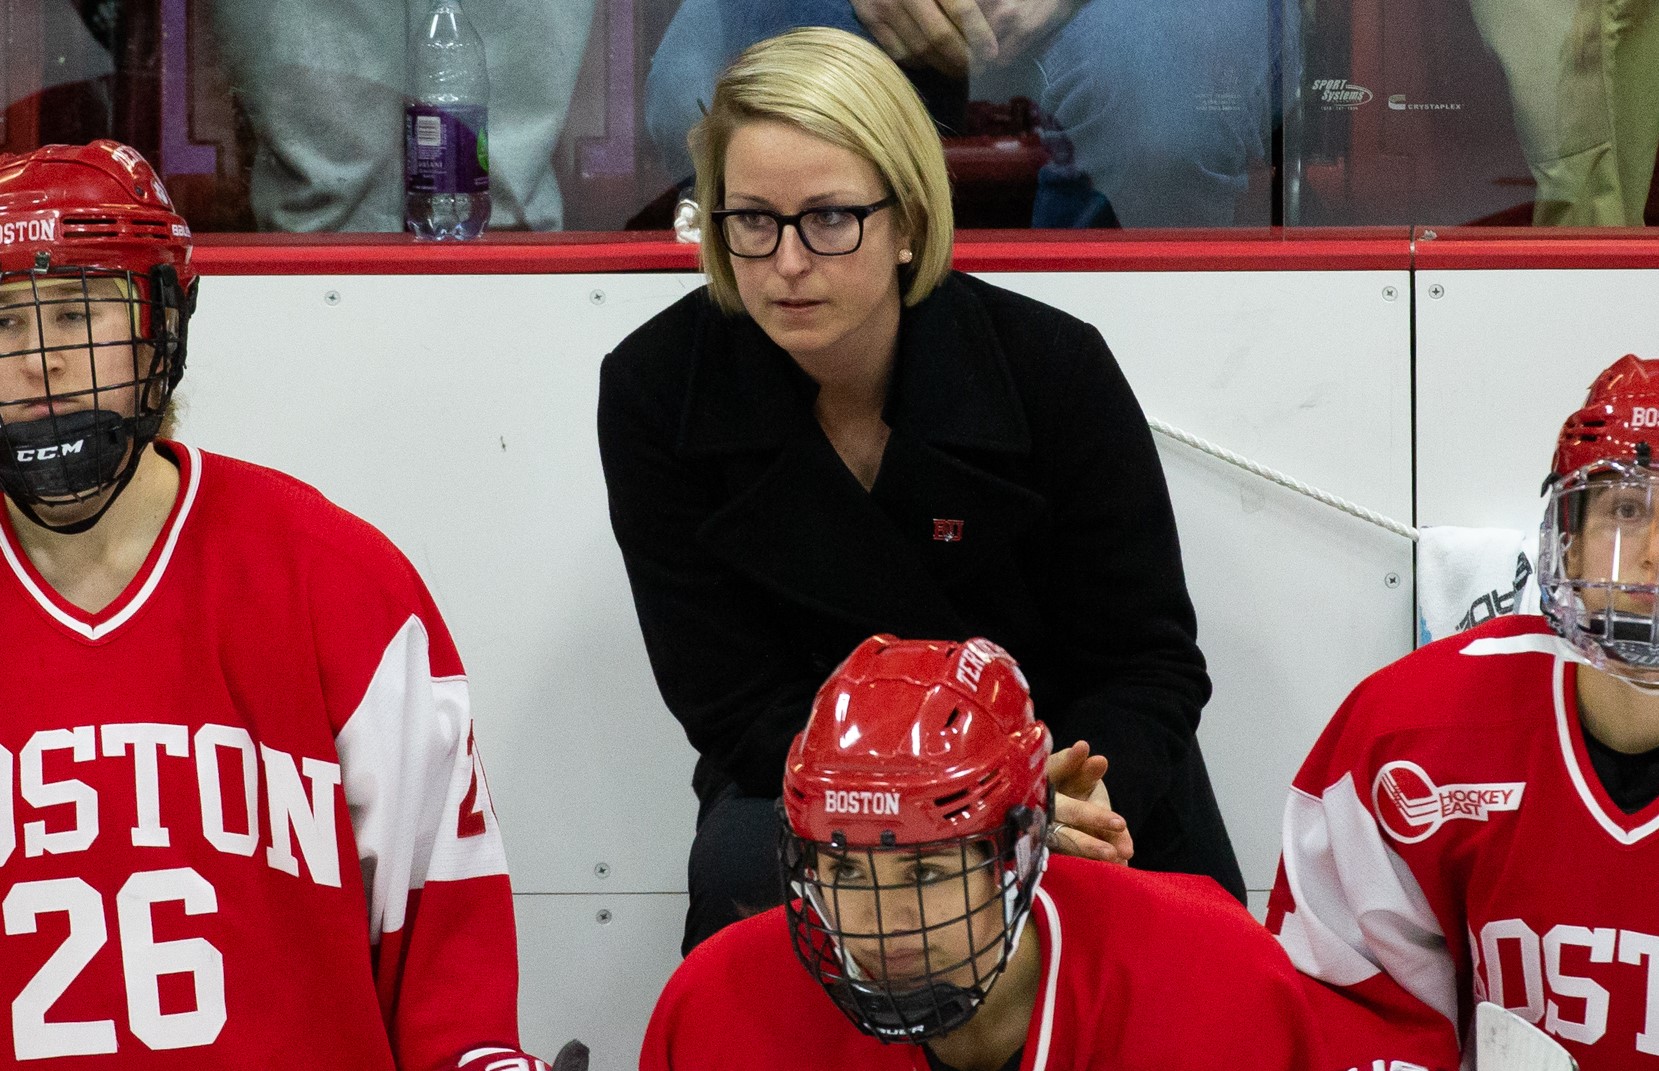 Boston University women's hockey assistant Watchorn tabbed first coach for Stonehill, which will start NEWHA play in '22-23 - College Hockey | USCHO.com